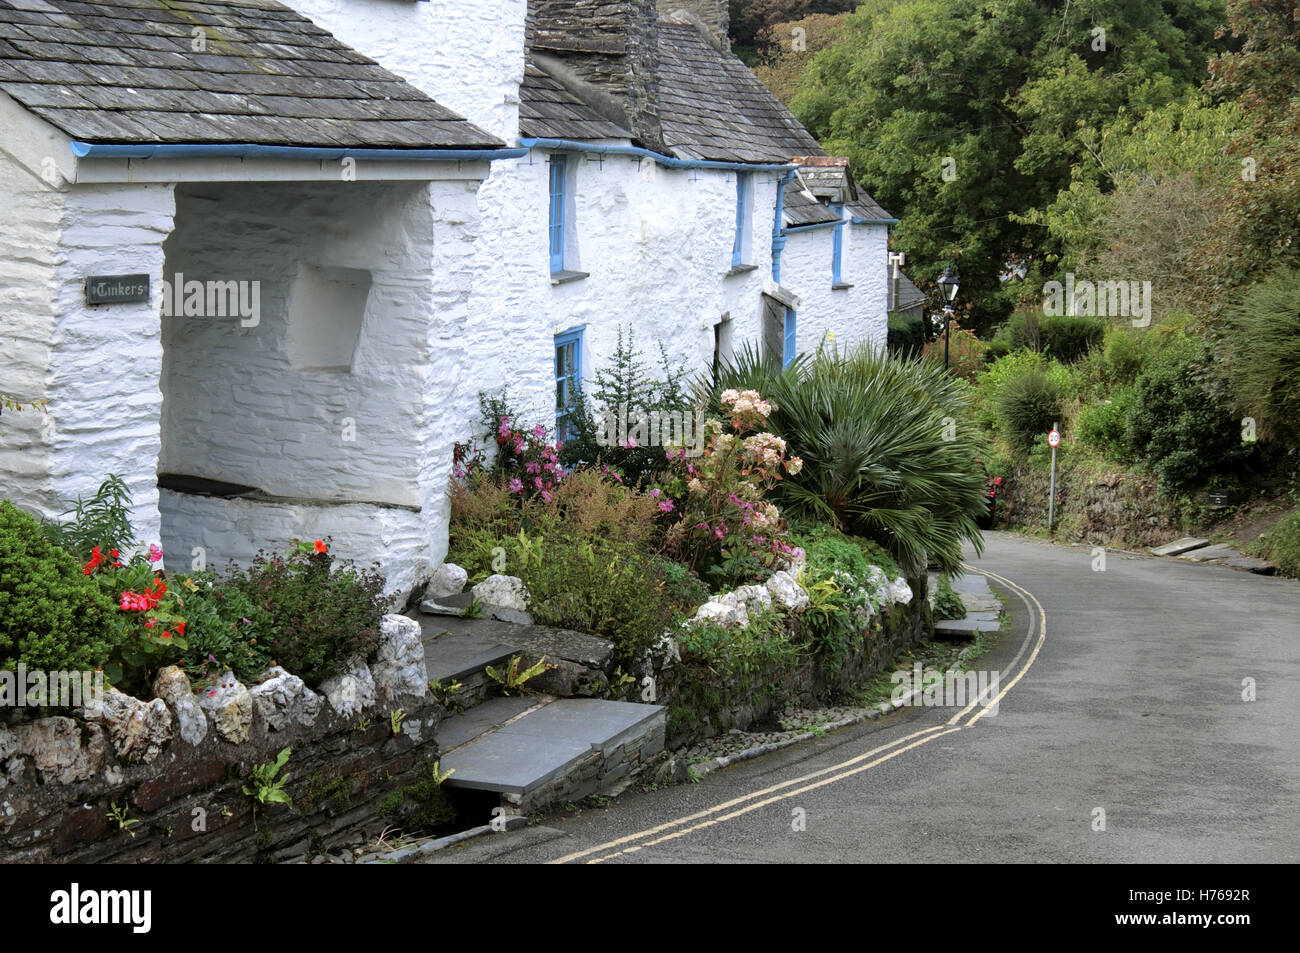 Row of Pretty White Washed Cottages, Boscastle Village, North Cornwall, England, UK Stock Photo